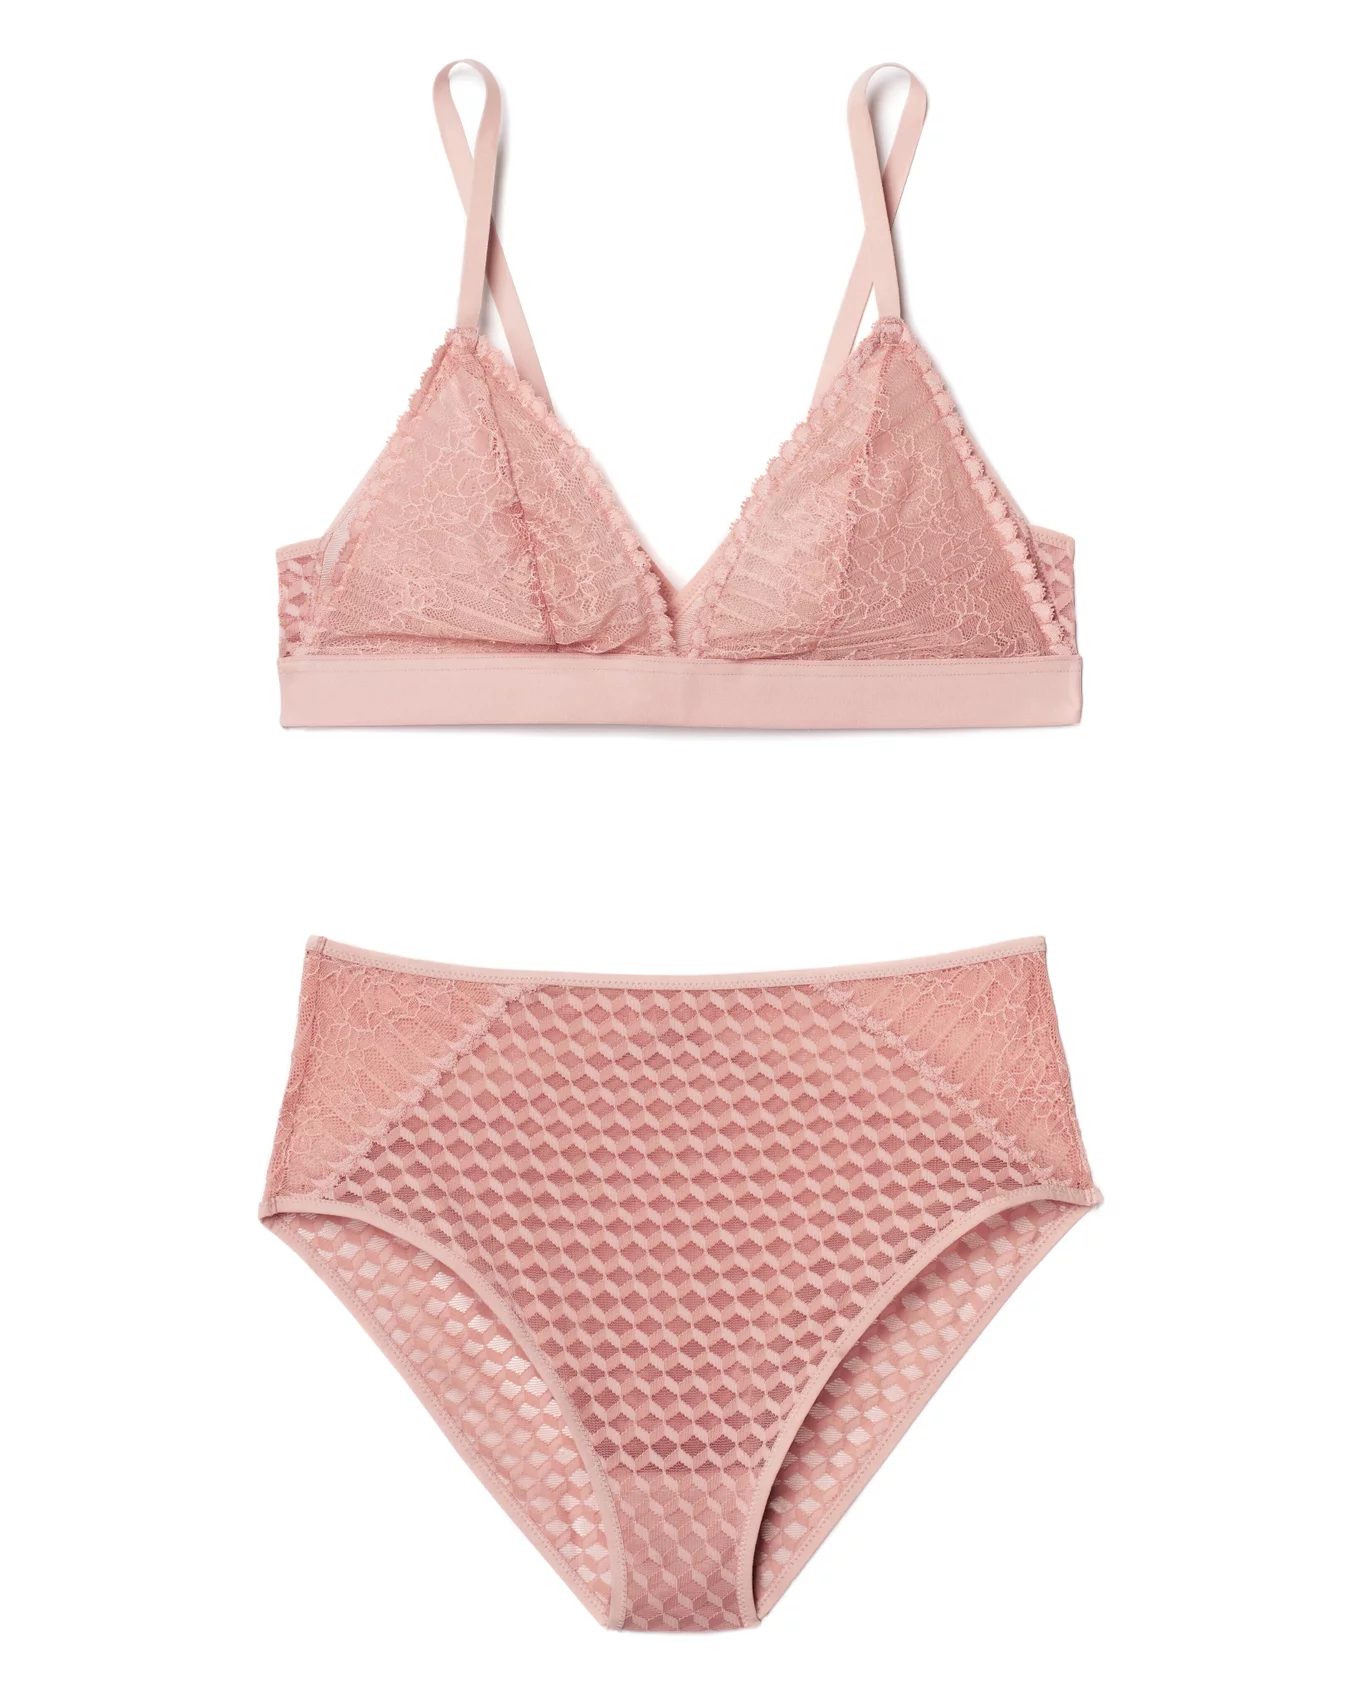 GUCCI Set: Triangle bra and panties with gift box in nude